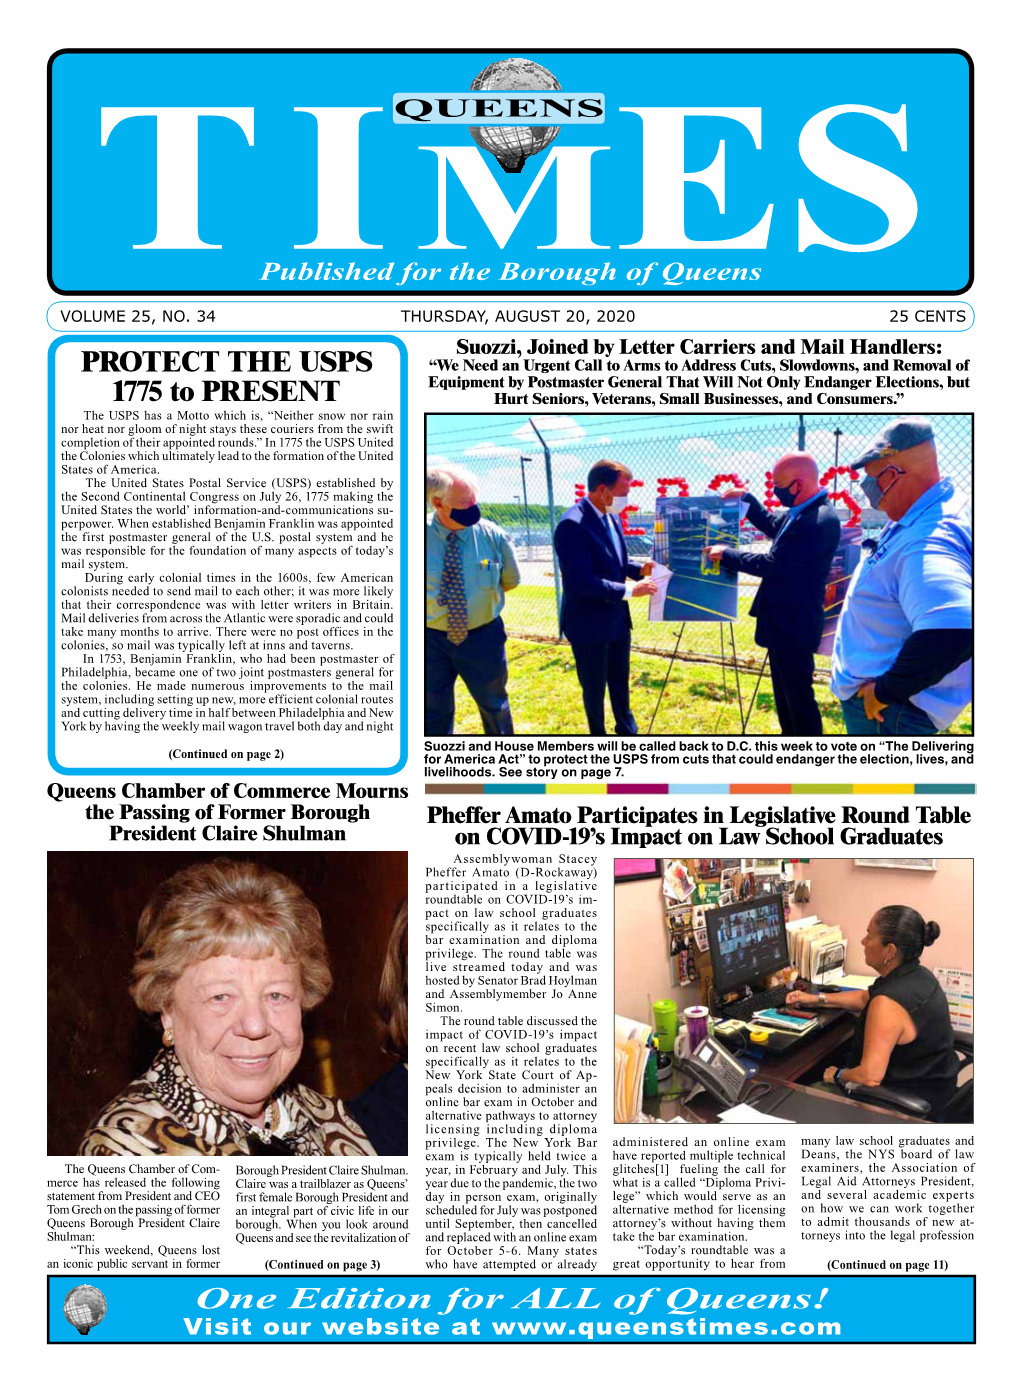 One Edition for ALL of Queens! Visit Our Website at PAGE 2 the QUEENS TIMES THURSDAY, AUGUST 20, 2020